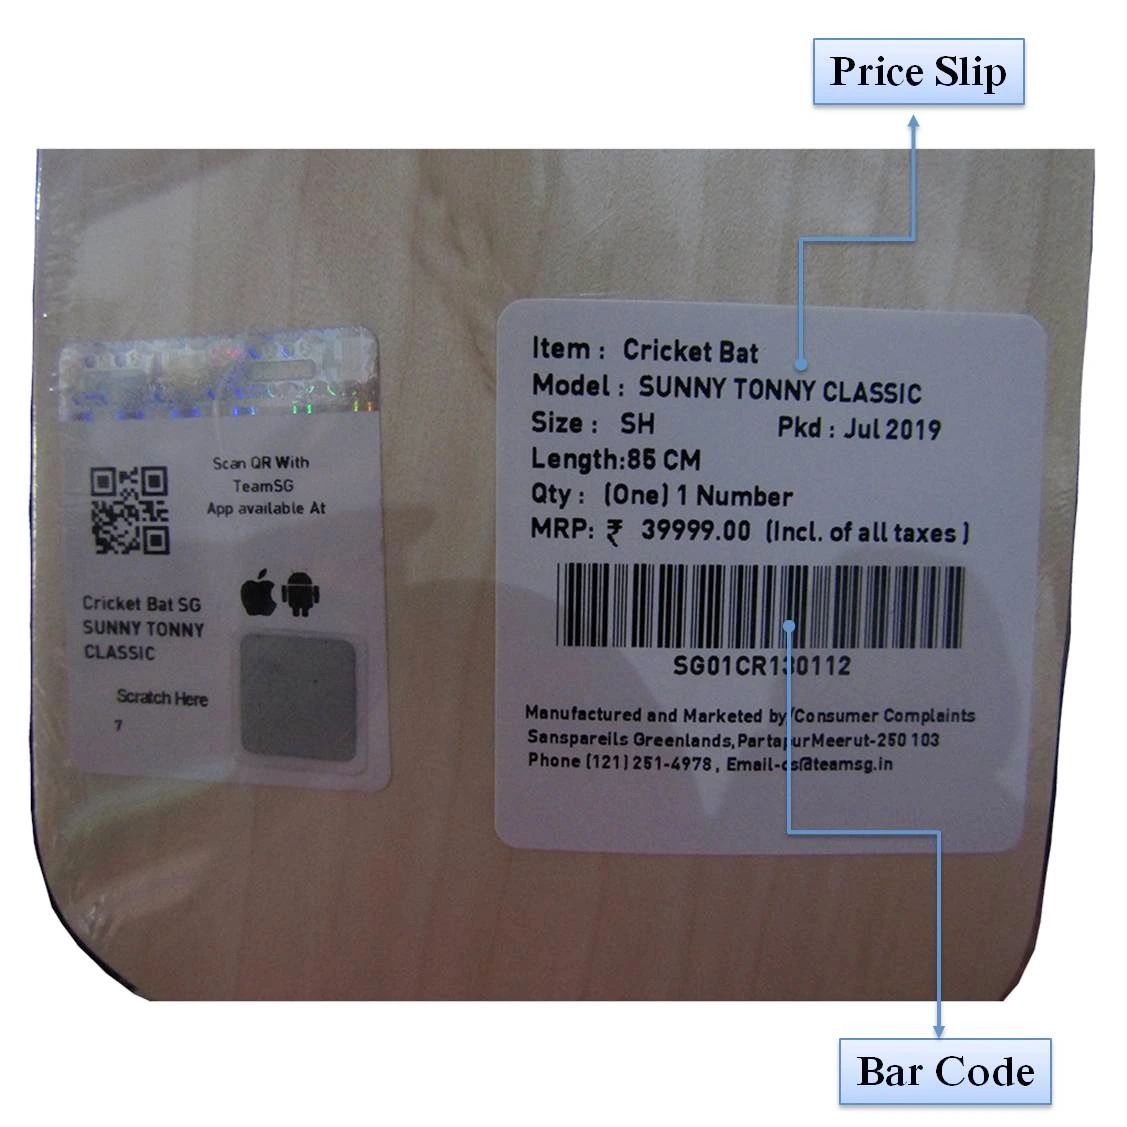 Sunny_Tonny_Classic_Price_Slip_and_barcode